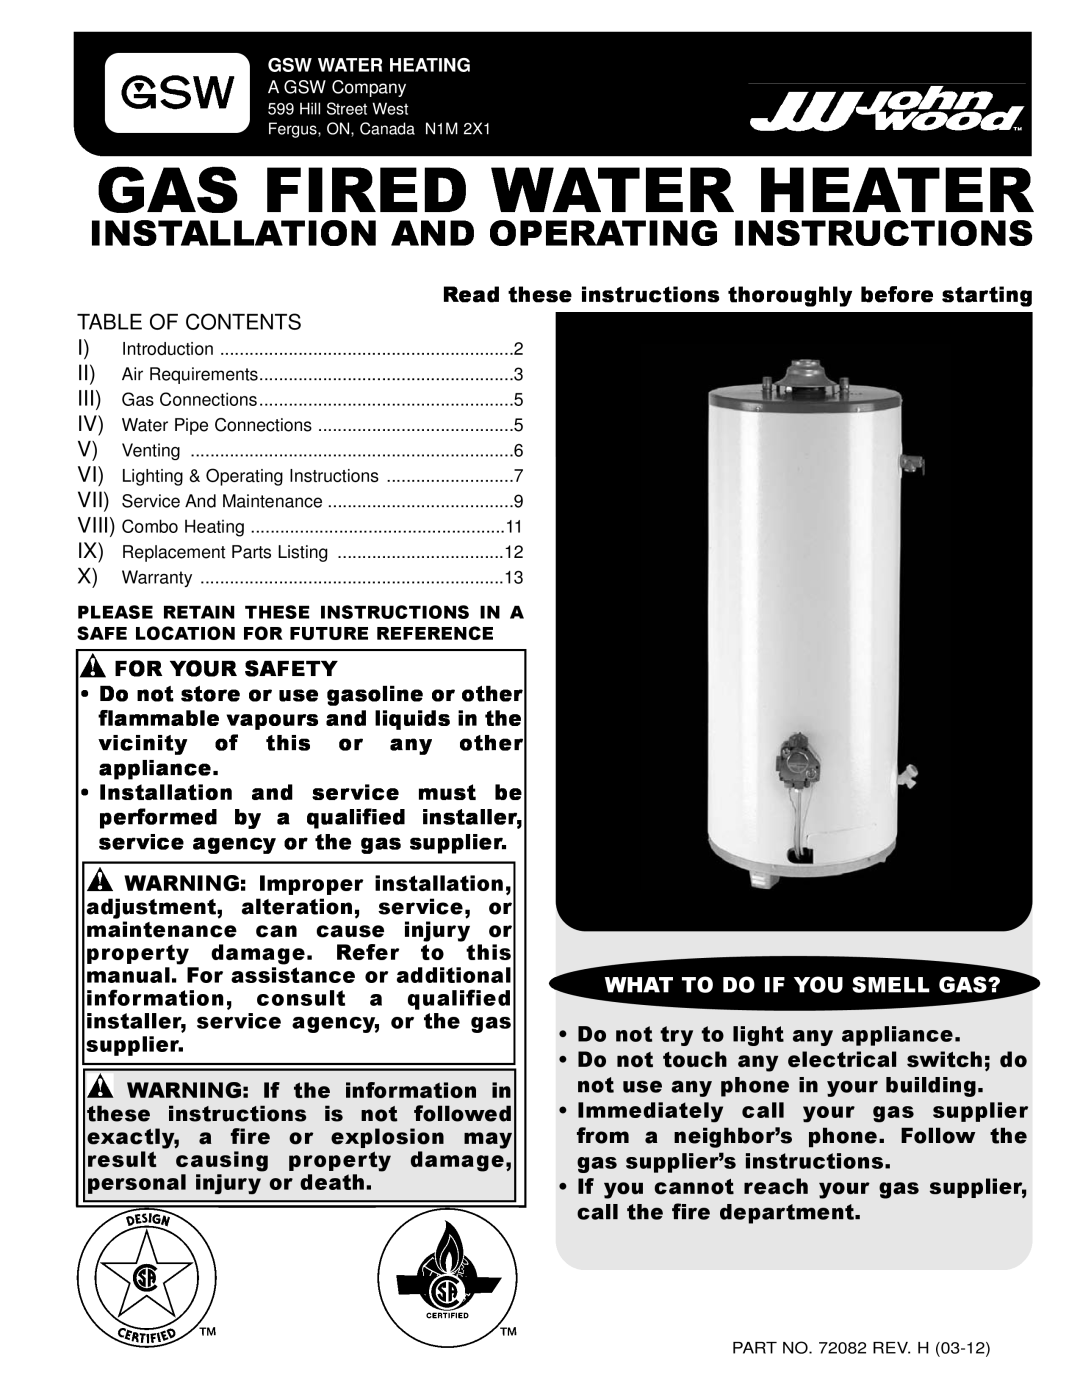 GSW Gas Fired Water Heater warranty For Your Safety, Do not try to light any appliance, What To Do If You Smell Gas? 